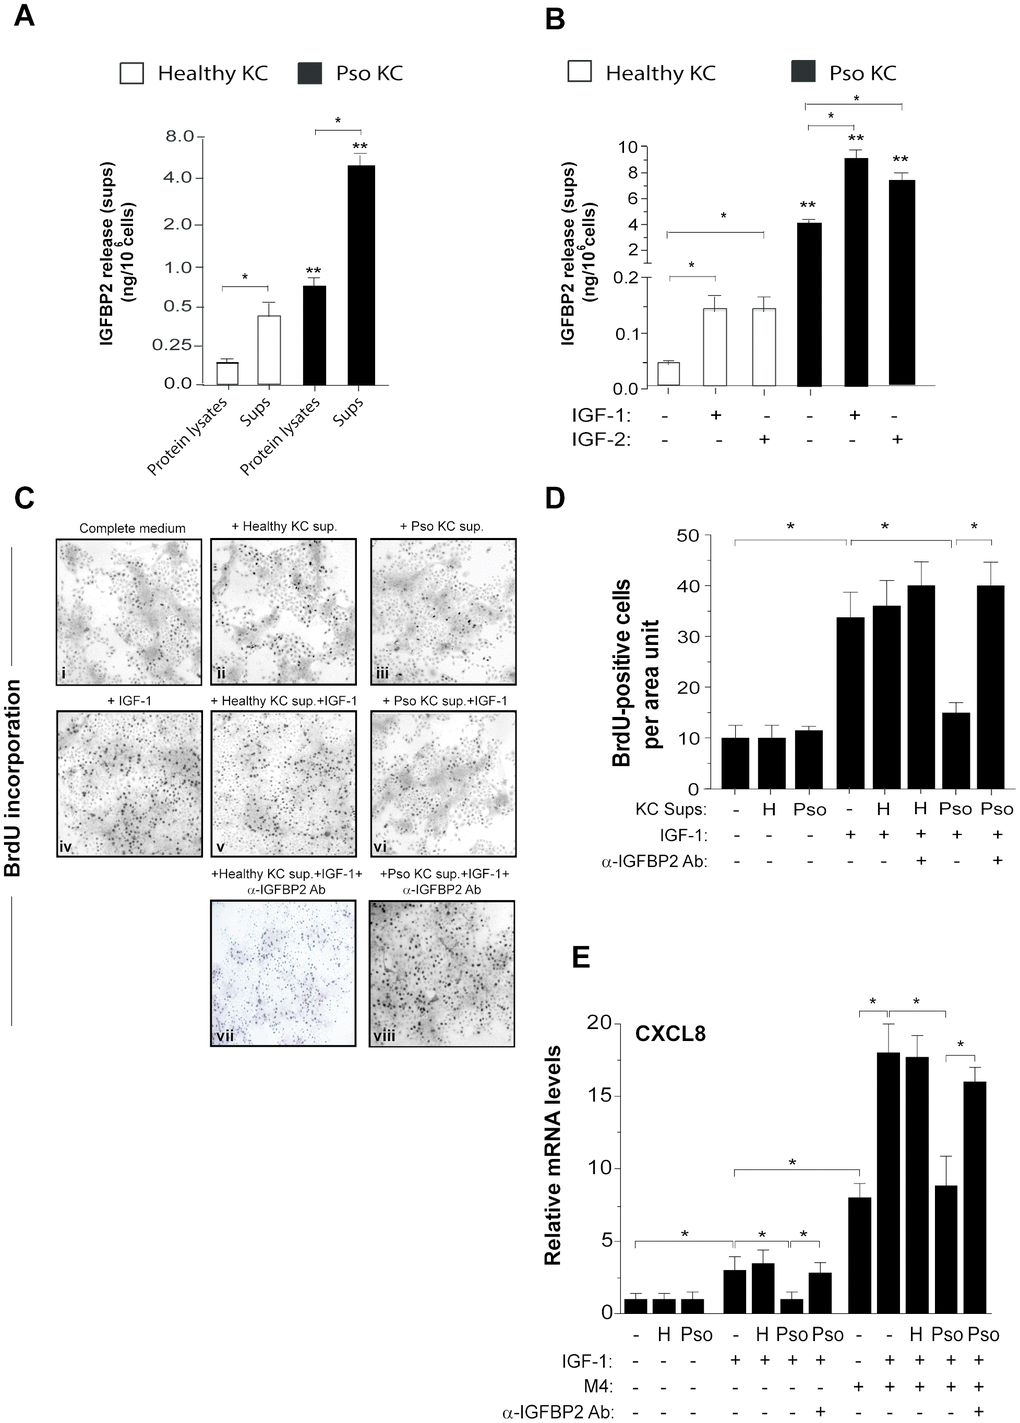 IGFBP2 production is induced by IGF-1 and is functionally active in psoriatic keratinocytes. IGFBP2 release was analysed by ELISA in protein lysates and supernatants (sups) of untreated healthy and pso KC cultures (A) or in sups of healthy and pso KC stimulated or not with 10 ng/ml IGF-1 or IGF-2 for 24 hours. (B) Data are expressed as mean of ng/106 cells ± SD of three different experiments carried out on different strains (n = 3). *p ≤ 0.05, as assessed by unpaired Student’s t test; **p ≤ 0.01, as calculated by the Mann–Whitney U test, comparing IGFBP2 production between healthy and pso KC groups. (C) BrdU incorporation was evaluated in healthy KC grown on coverslips and treated with complete medium alone (i) or 10-fold concentrated sup. of healthy KC (ii) or of pso KC (Pso) (iii). In parallel, healthy KC were treated with IGF-1 (10 ng/ml) alone (iv), or in presence of 10-fold concentrated healthy KC sups (v), or pso KC sups (vi). In two experimental conditions, 1 μg/ml of neutralizing anti-IGFBP2 Ab (α-IGFBP2) was added (vii, viii). Images are relative to one of three independent experiments performed on three different healthy KC strains. (D) Graphs represent the number of BrdU-positive cells counted in high power fields and expressed as cells per area unit ± SD (n [microscopic fields per slide] = 6); H, healthy KC sups; Pso, psoriatic KC sups. (E) CXCL8 mRNA levels were detected by Real-time PCR in healthy KC stimulated for 8 hours with IGF-1 (10 ng/ml) alone or in combination with M4, including IFN-γ (200 U/ml), TNF-α (50 ng/ml), IL-17A (50 ng/ml) and IL-22 (50 ng/ml), in presence or not of healthy (H) or psoriatic (Pso) supernatants. In two experimental settings, 1 μg/ml of neutralizing anti-IGFBP2 Ab (α-IGFBP2) was added. Data shown are means of relative mRNA expression (normalized to GAPDH) of three independent experiments. (D, E), *p ≤ 0.05, as calculated by unpaired Student’s t test.